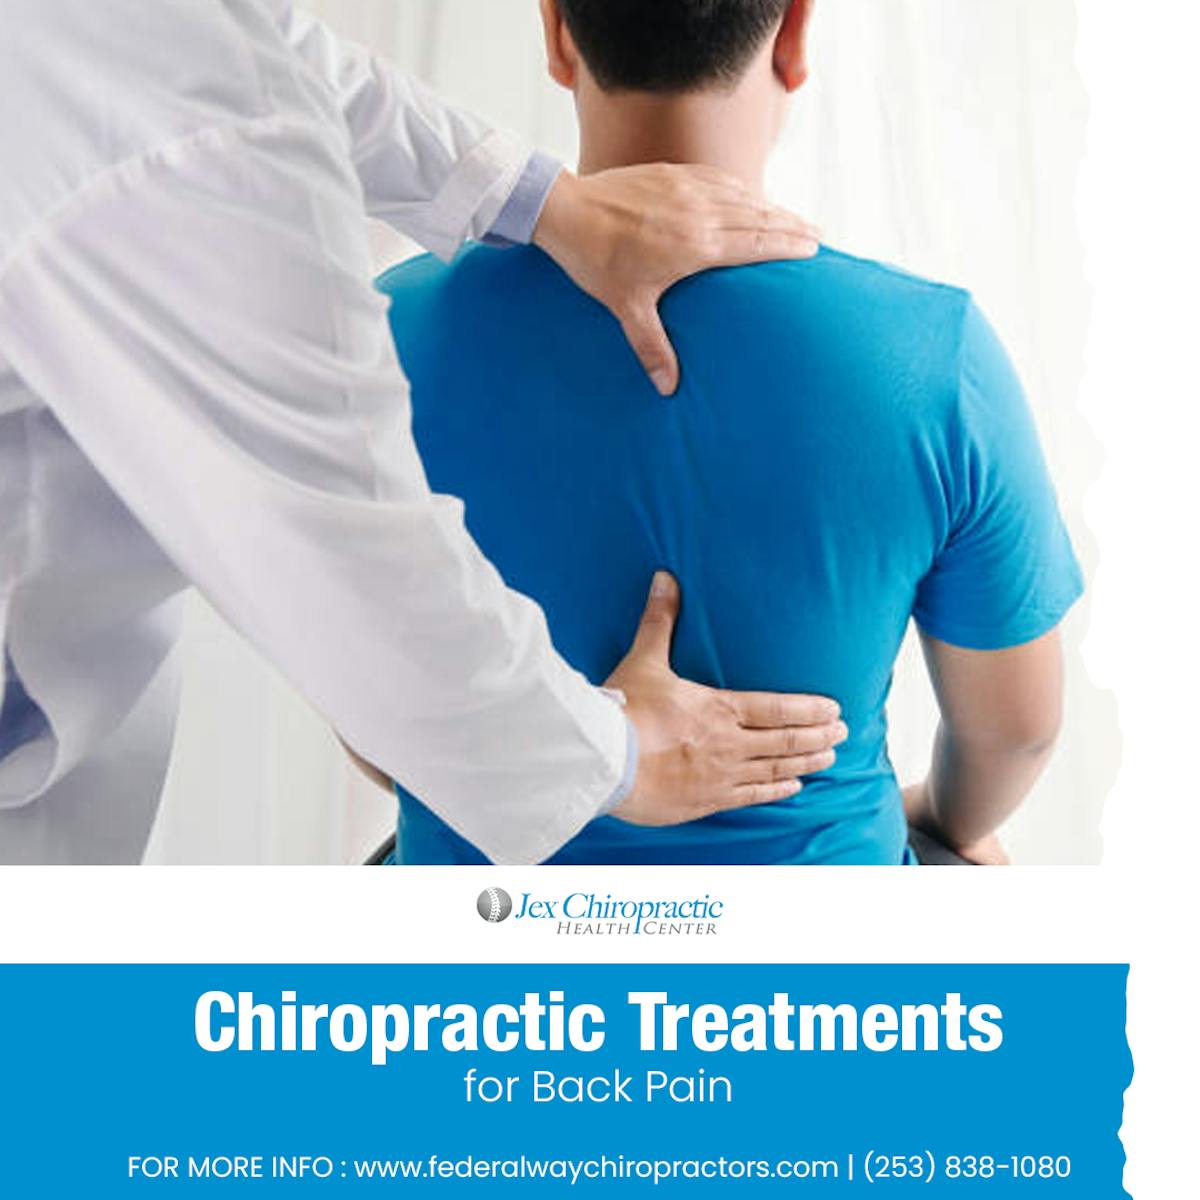 Jex Chiropractic Health Center: Your Path to Pain Relief and Total Body Wellness